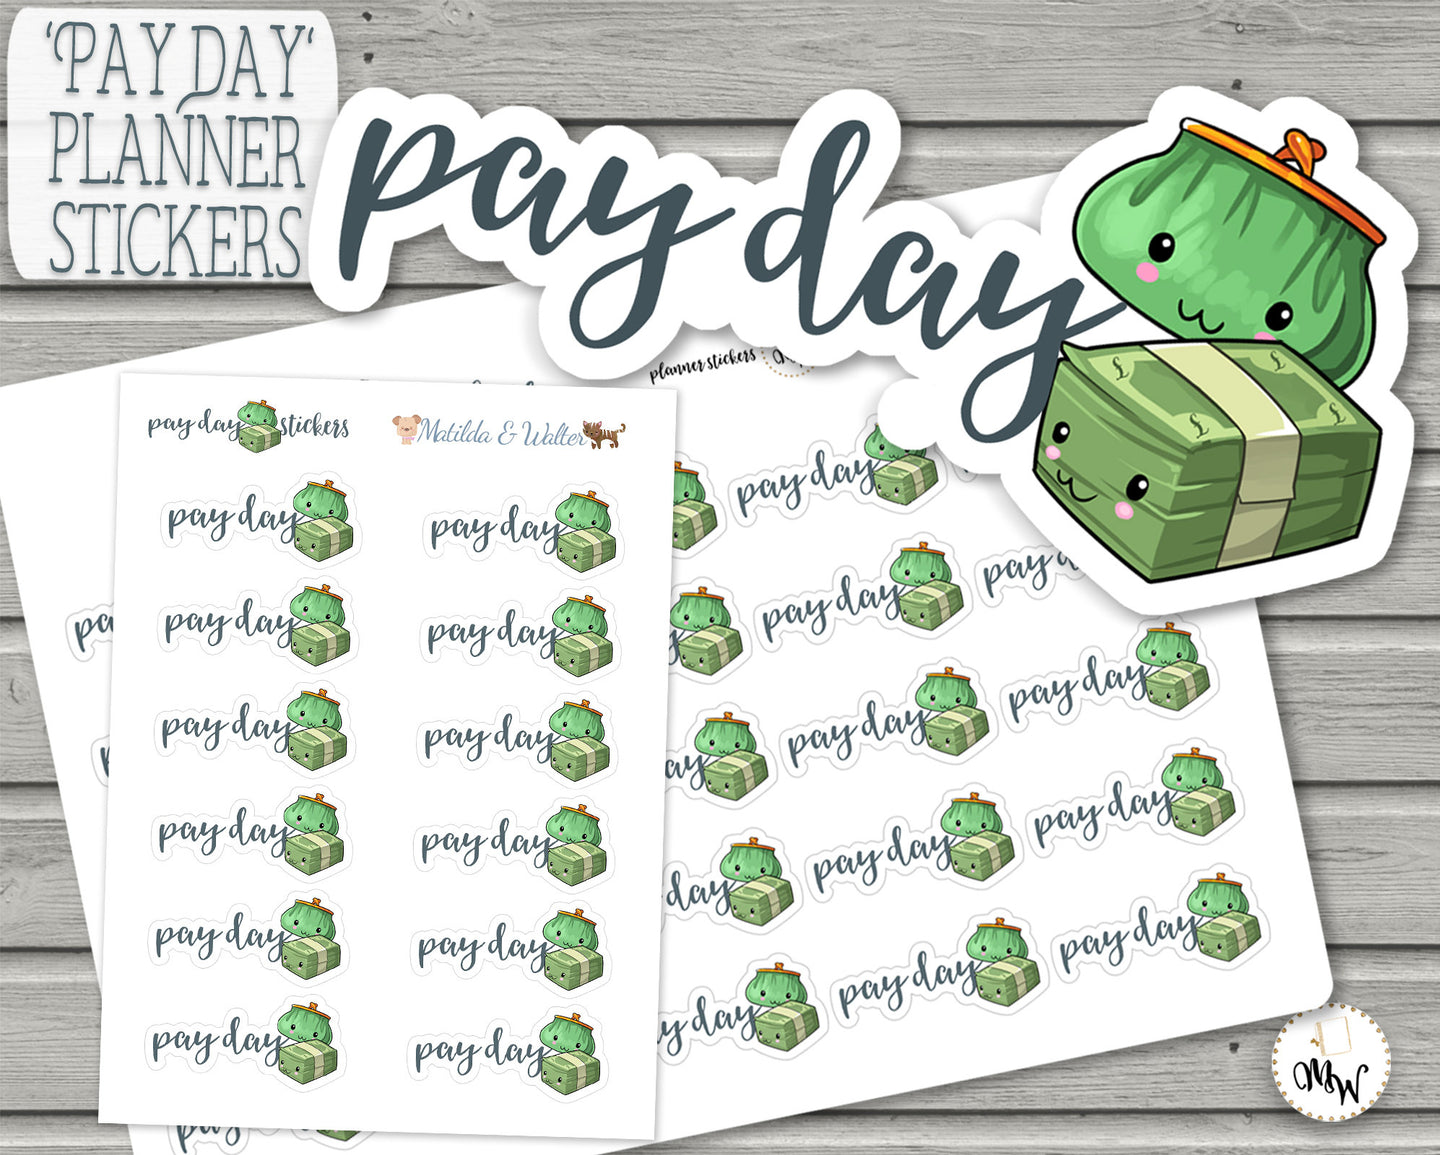 Pay Day Stickers - mini handmade planner stickers from the Functional Art Kawaii series